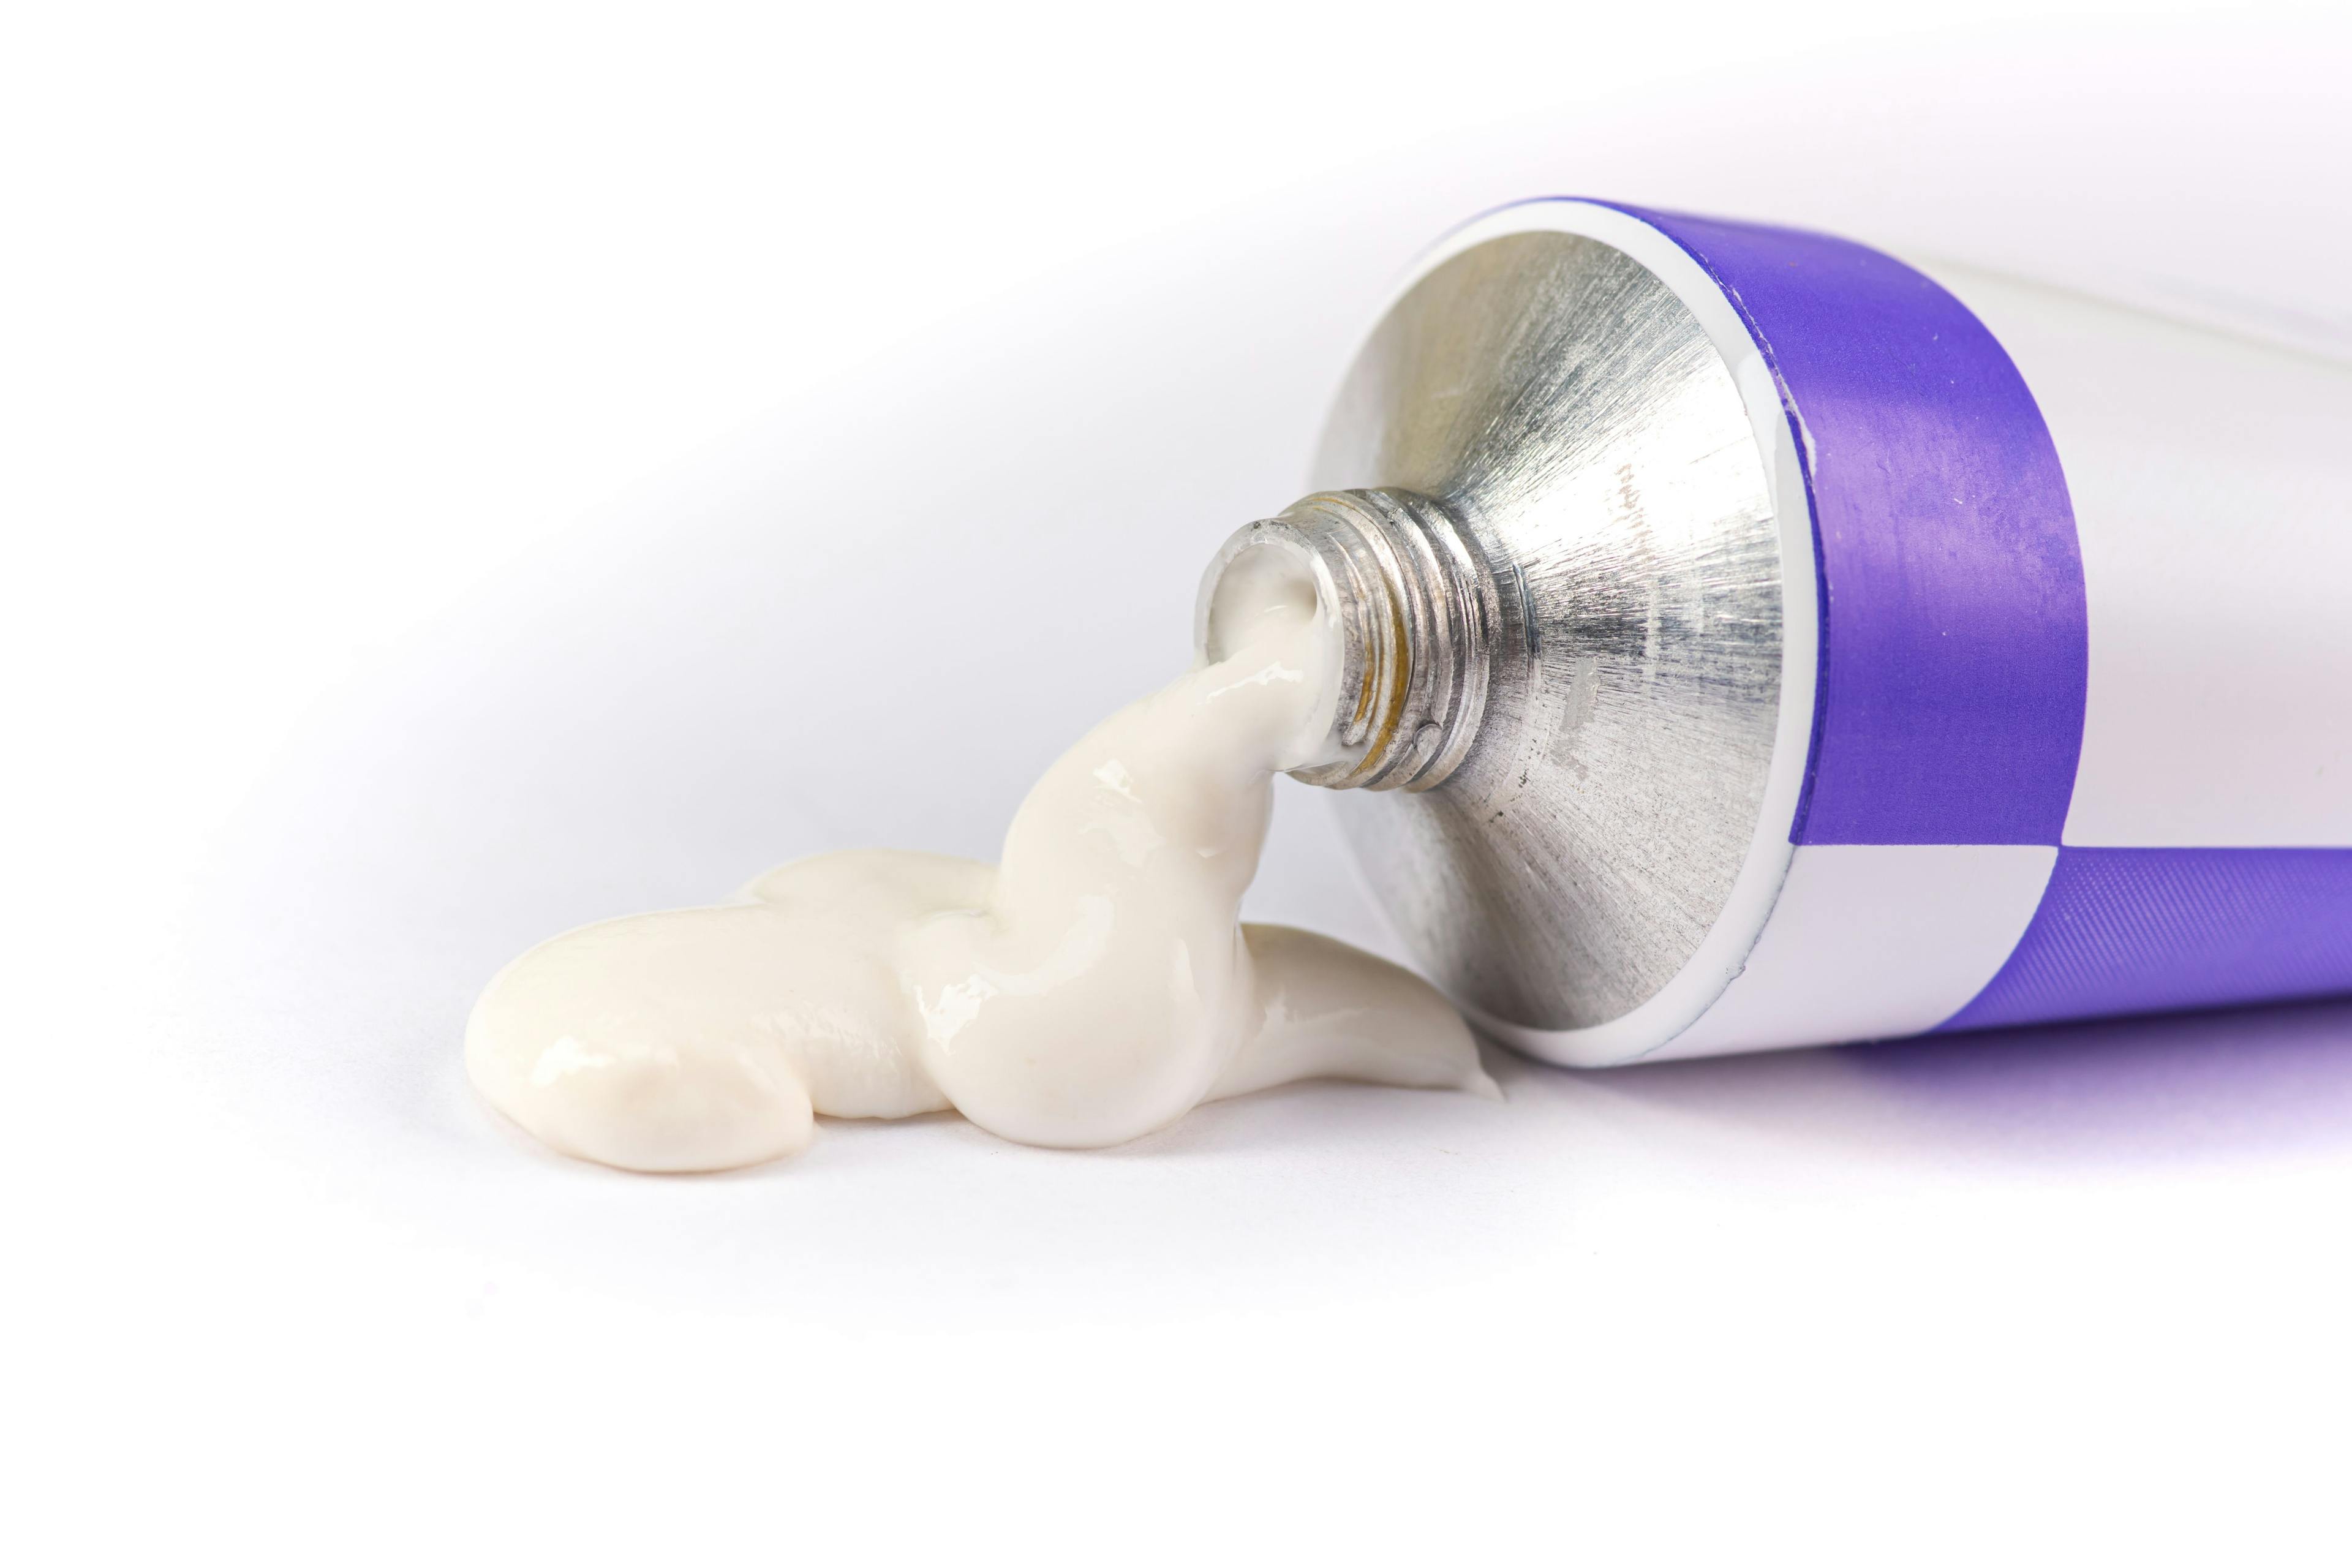 Six companies received FDA warning letters for their OTC topical analgesic products. | Image credit: Vasily Popov - stock.adobe.com